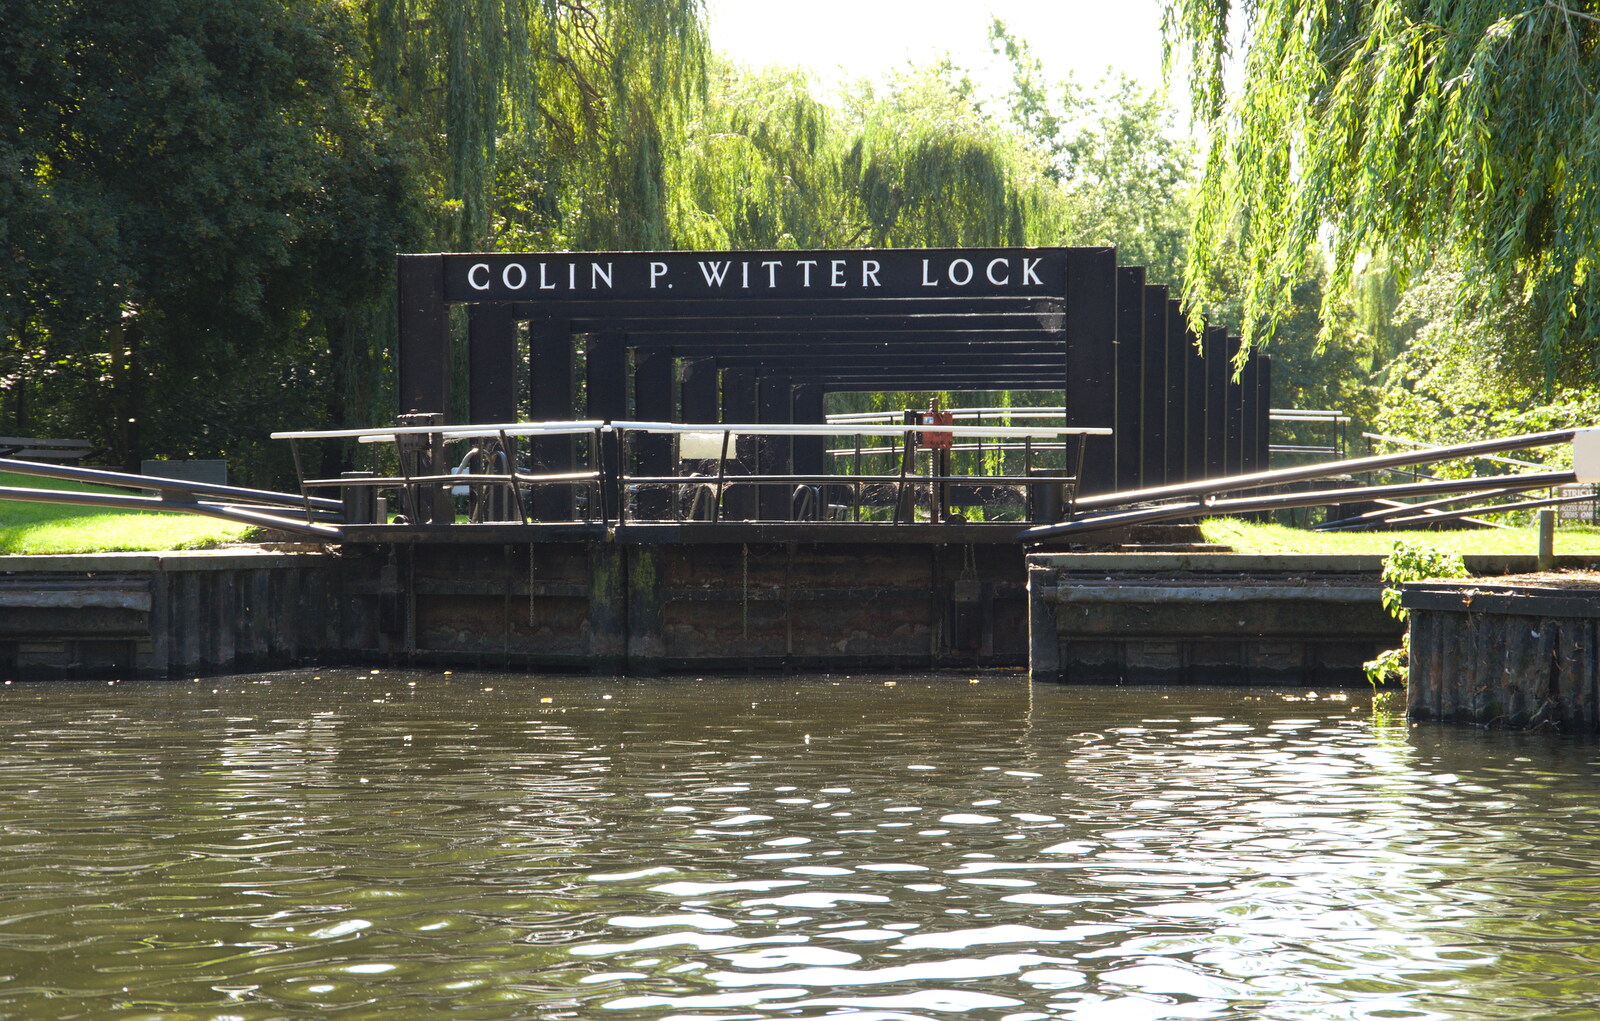 The heavily-reinforced Colin P Witter canal lock from A Boat Trip on the River, Stratford upon Avon, Warwickshire - 14th September 2019